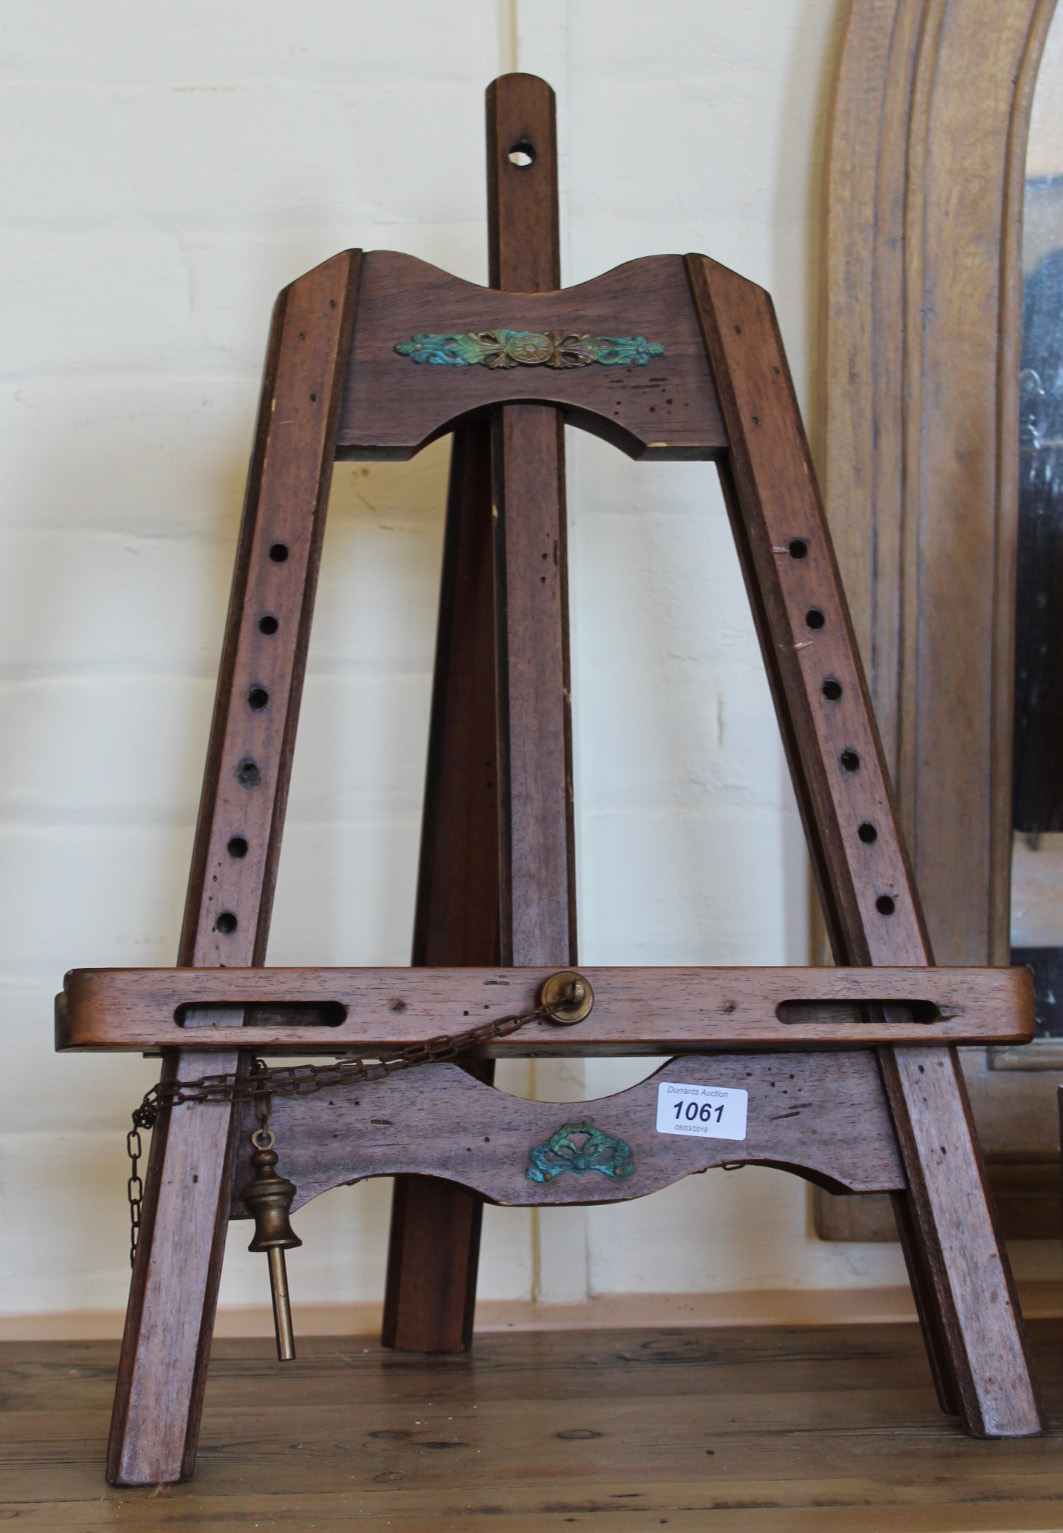 A small vintage artist's easel